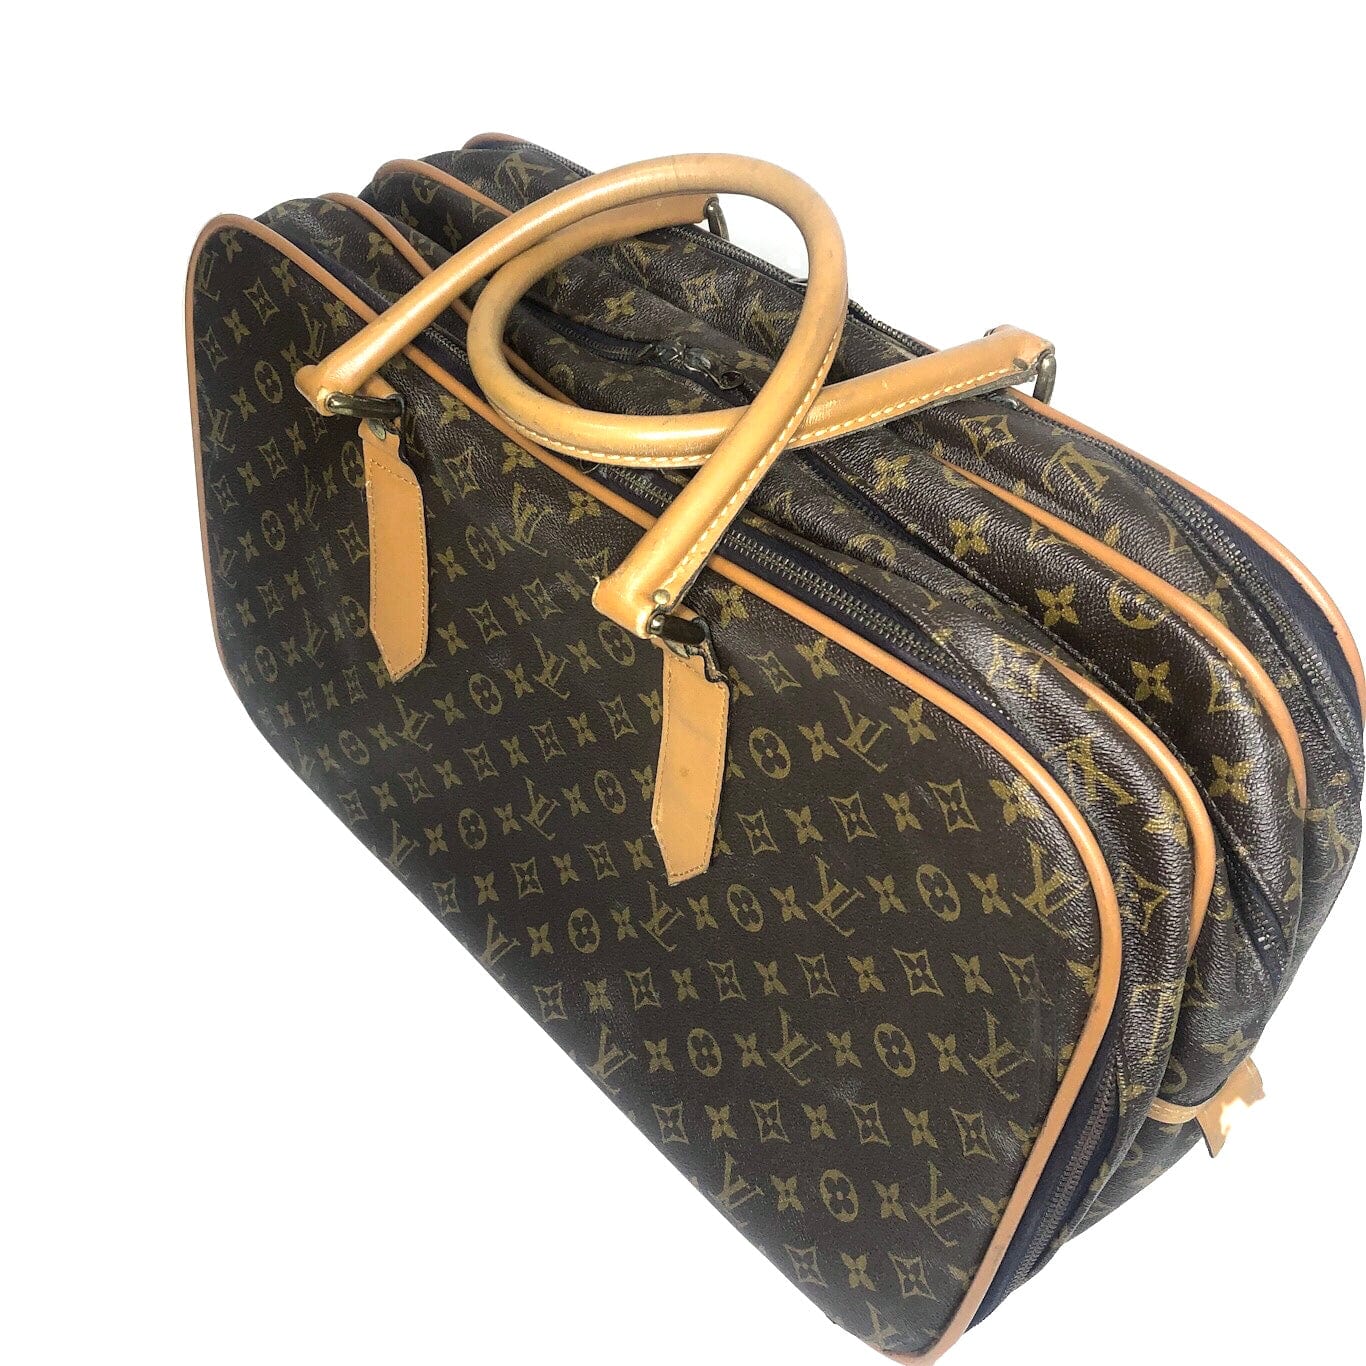 70s The French Co. Louis Vuitton Monogram Weekender Bag